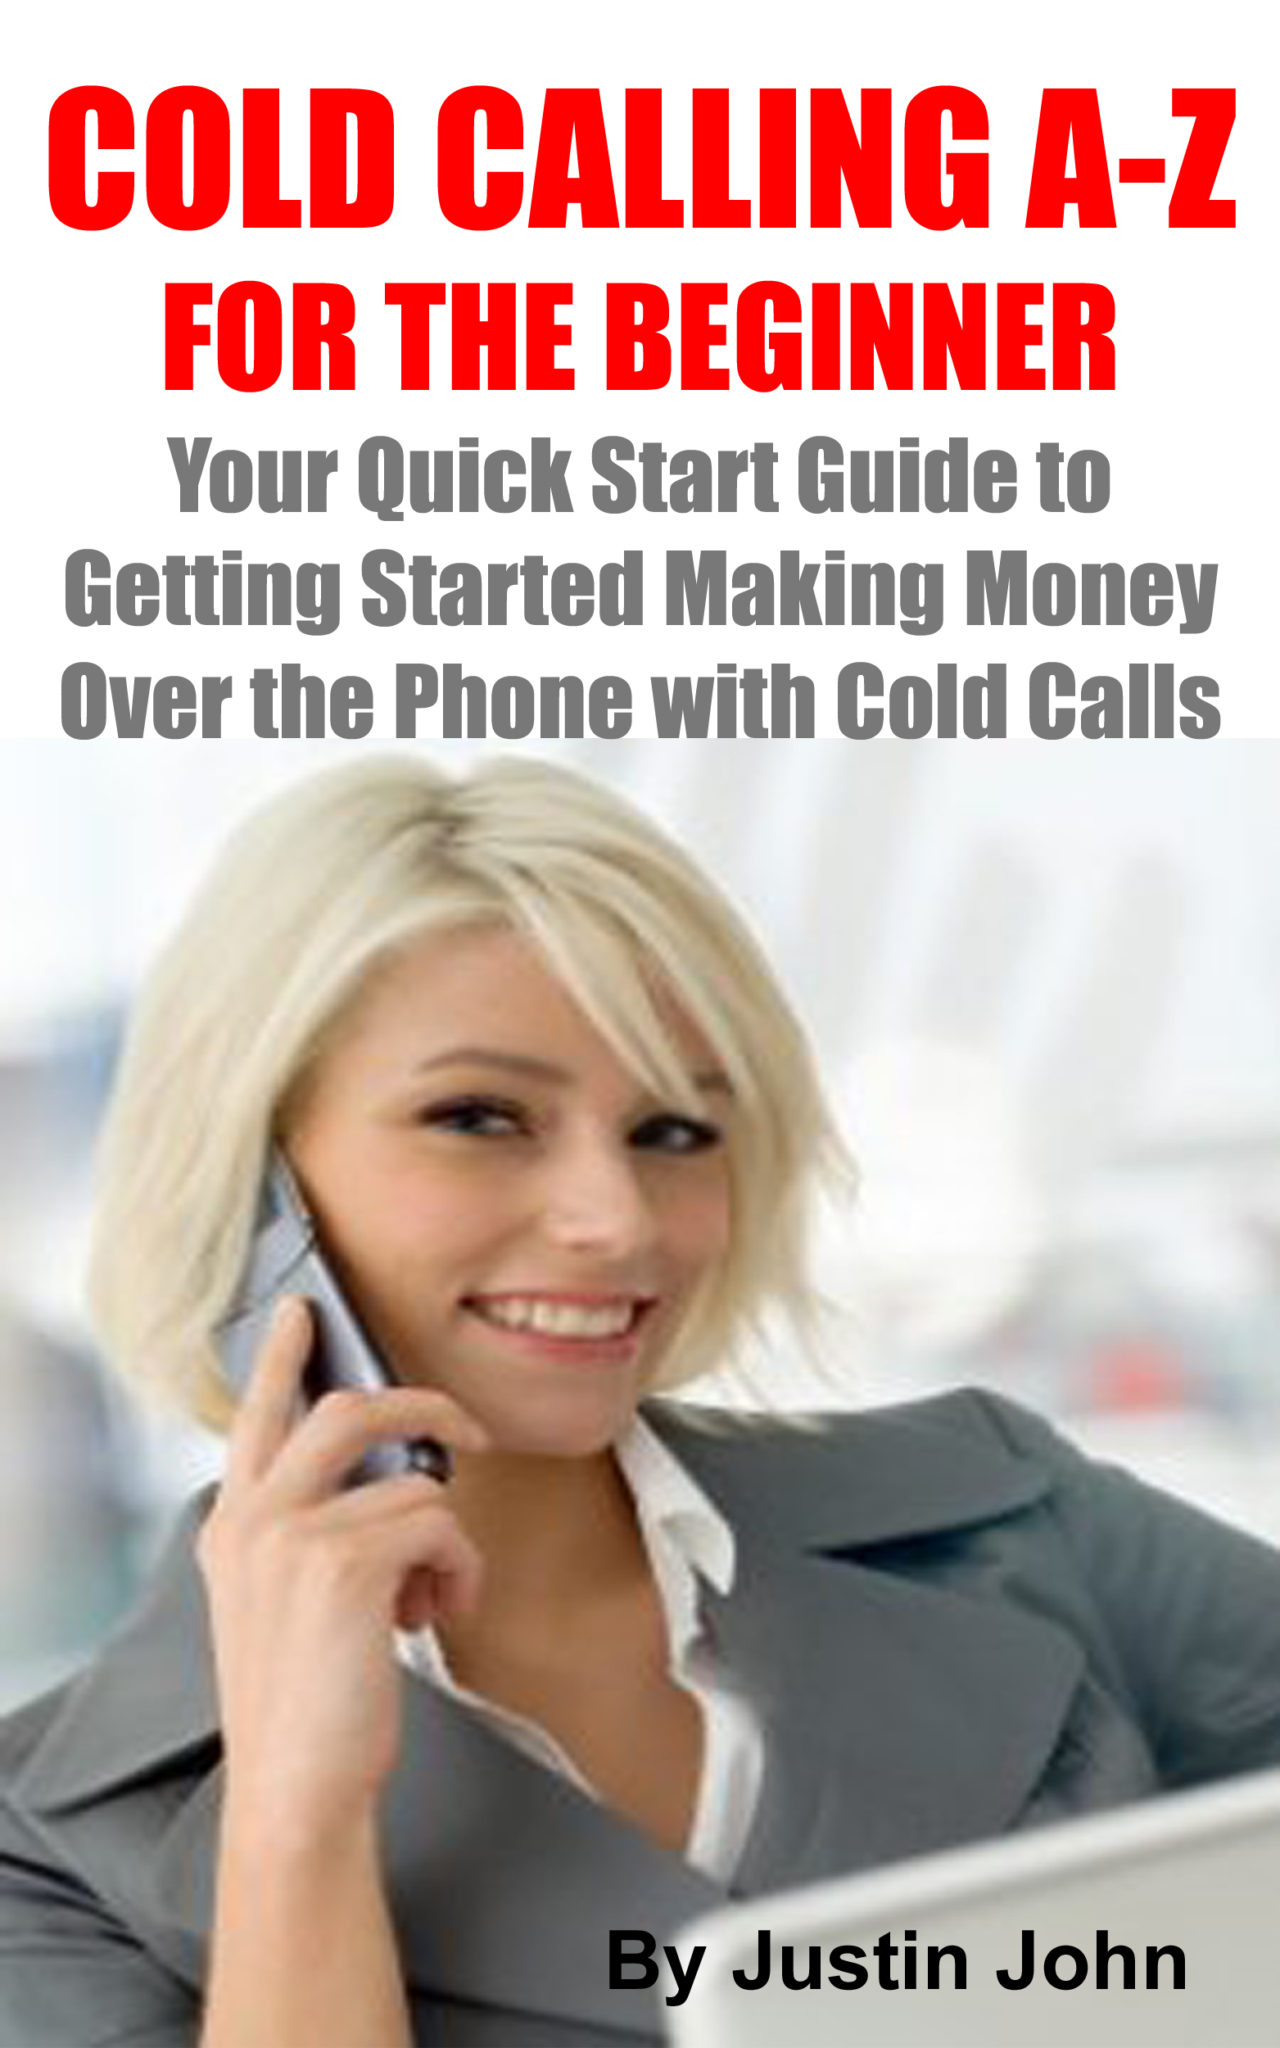 Cold Calling A-Z for the Beginner: Your Quick Start Guide to Getting Started Making Money Over the Phone with Cold Calls by Justin John